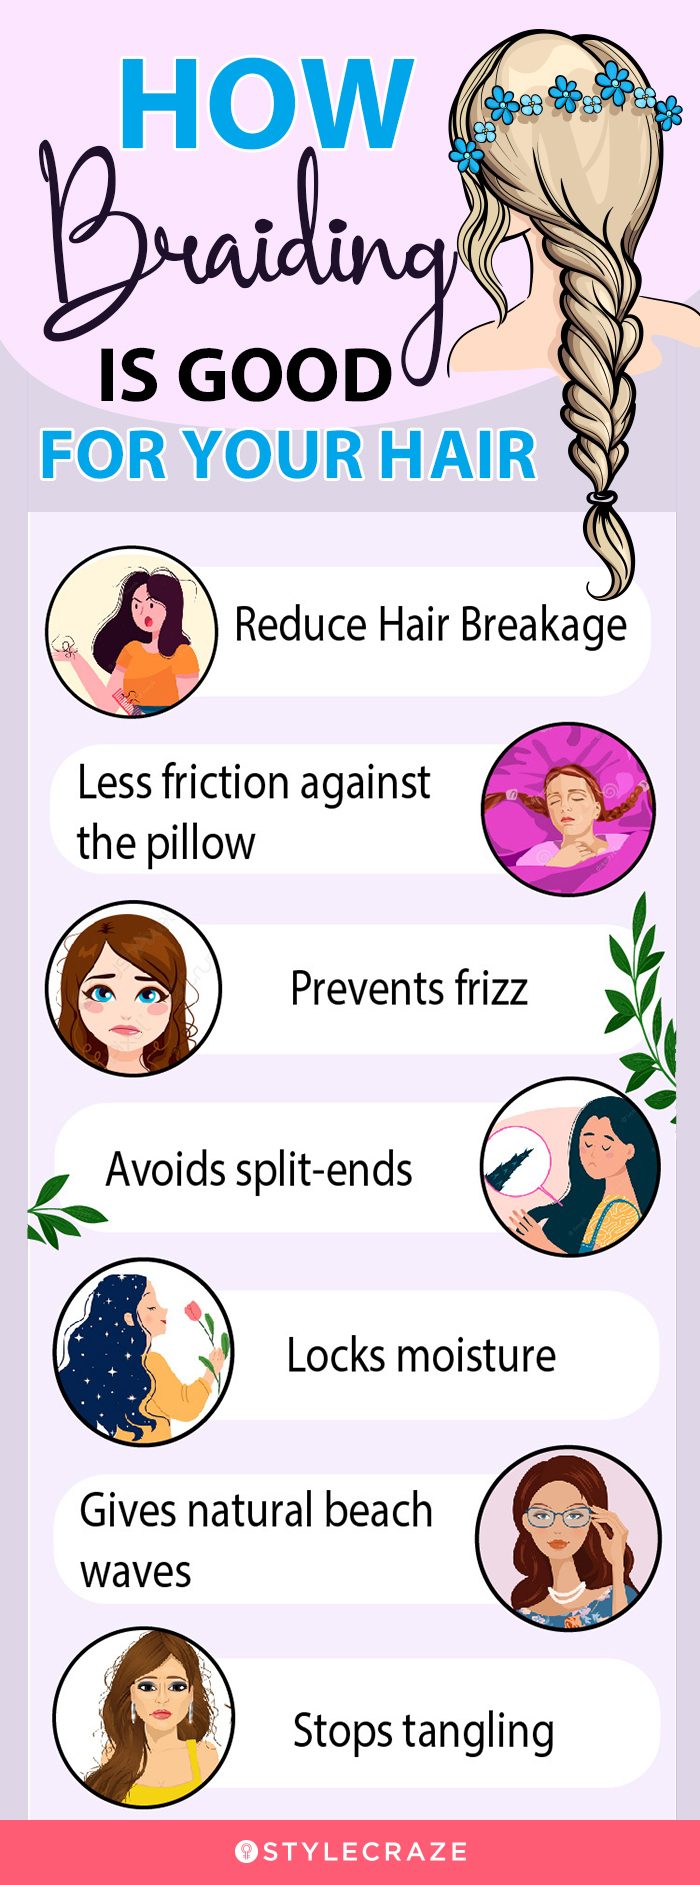 how braiding is good for your hair [infographic]